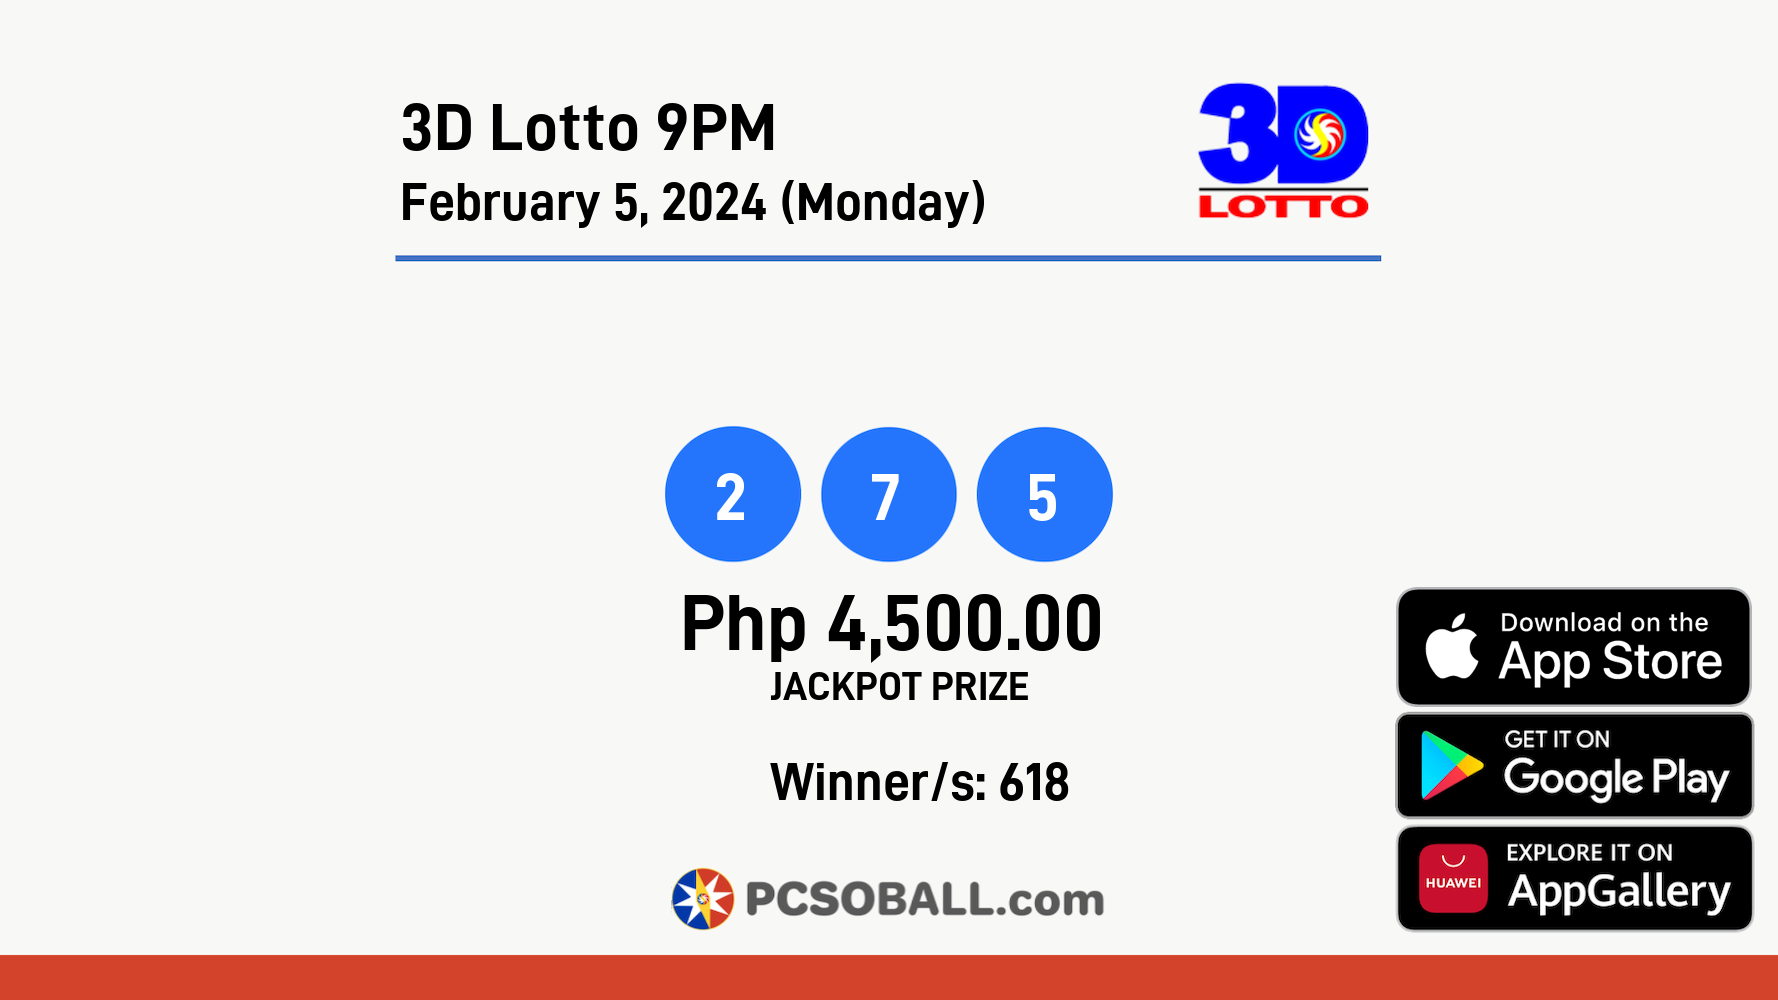 3D Lotto 9PM February 5, 2024 (Monday) Result